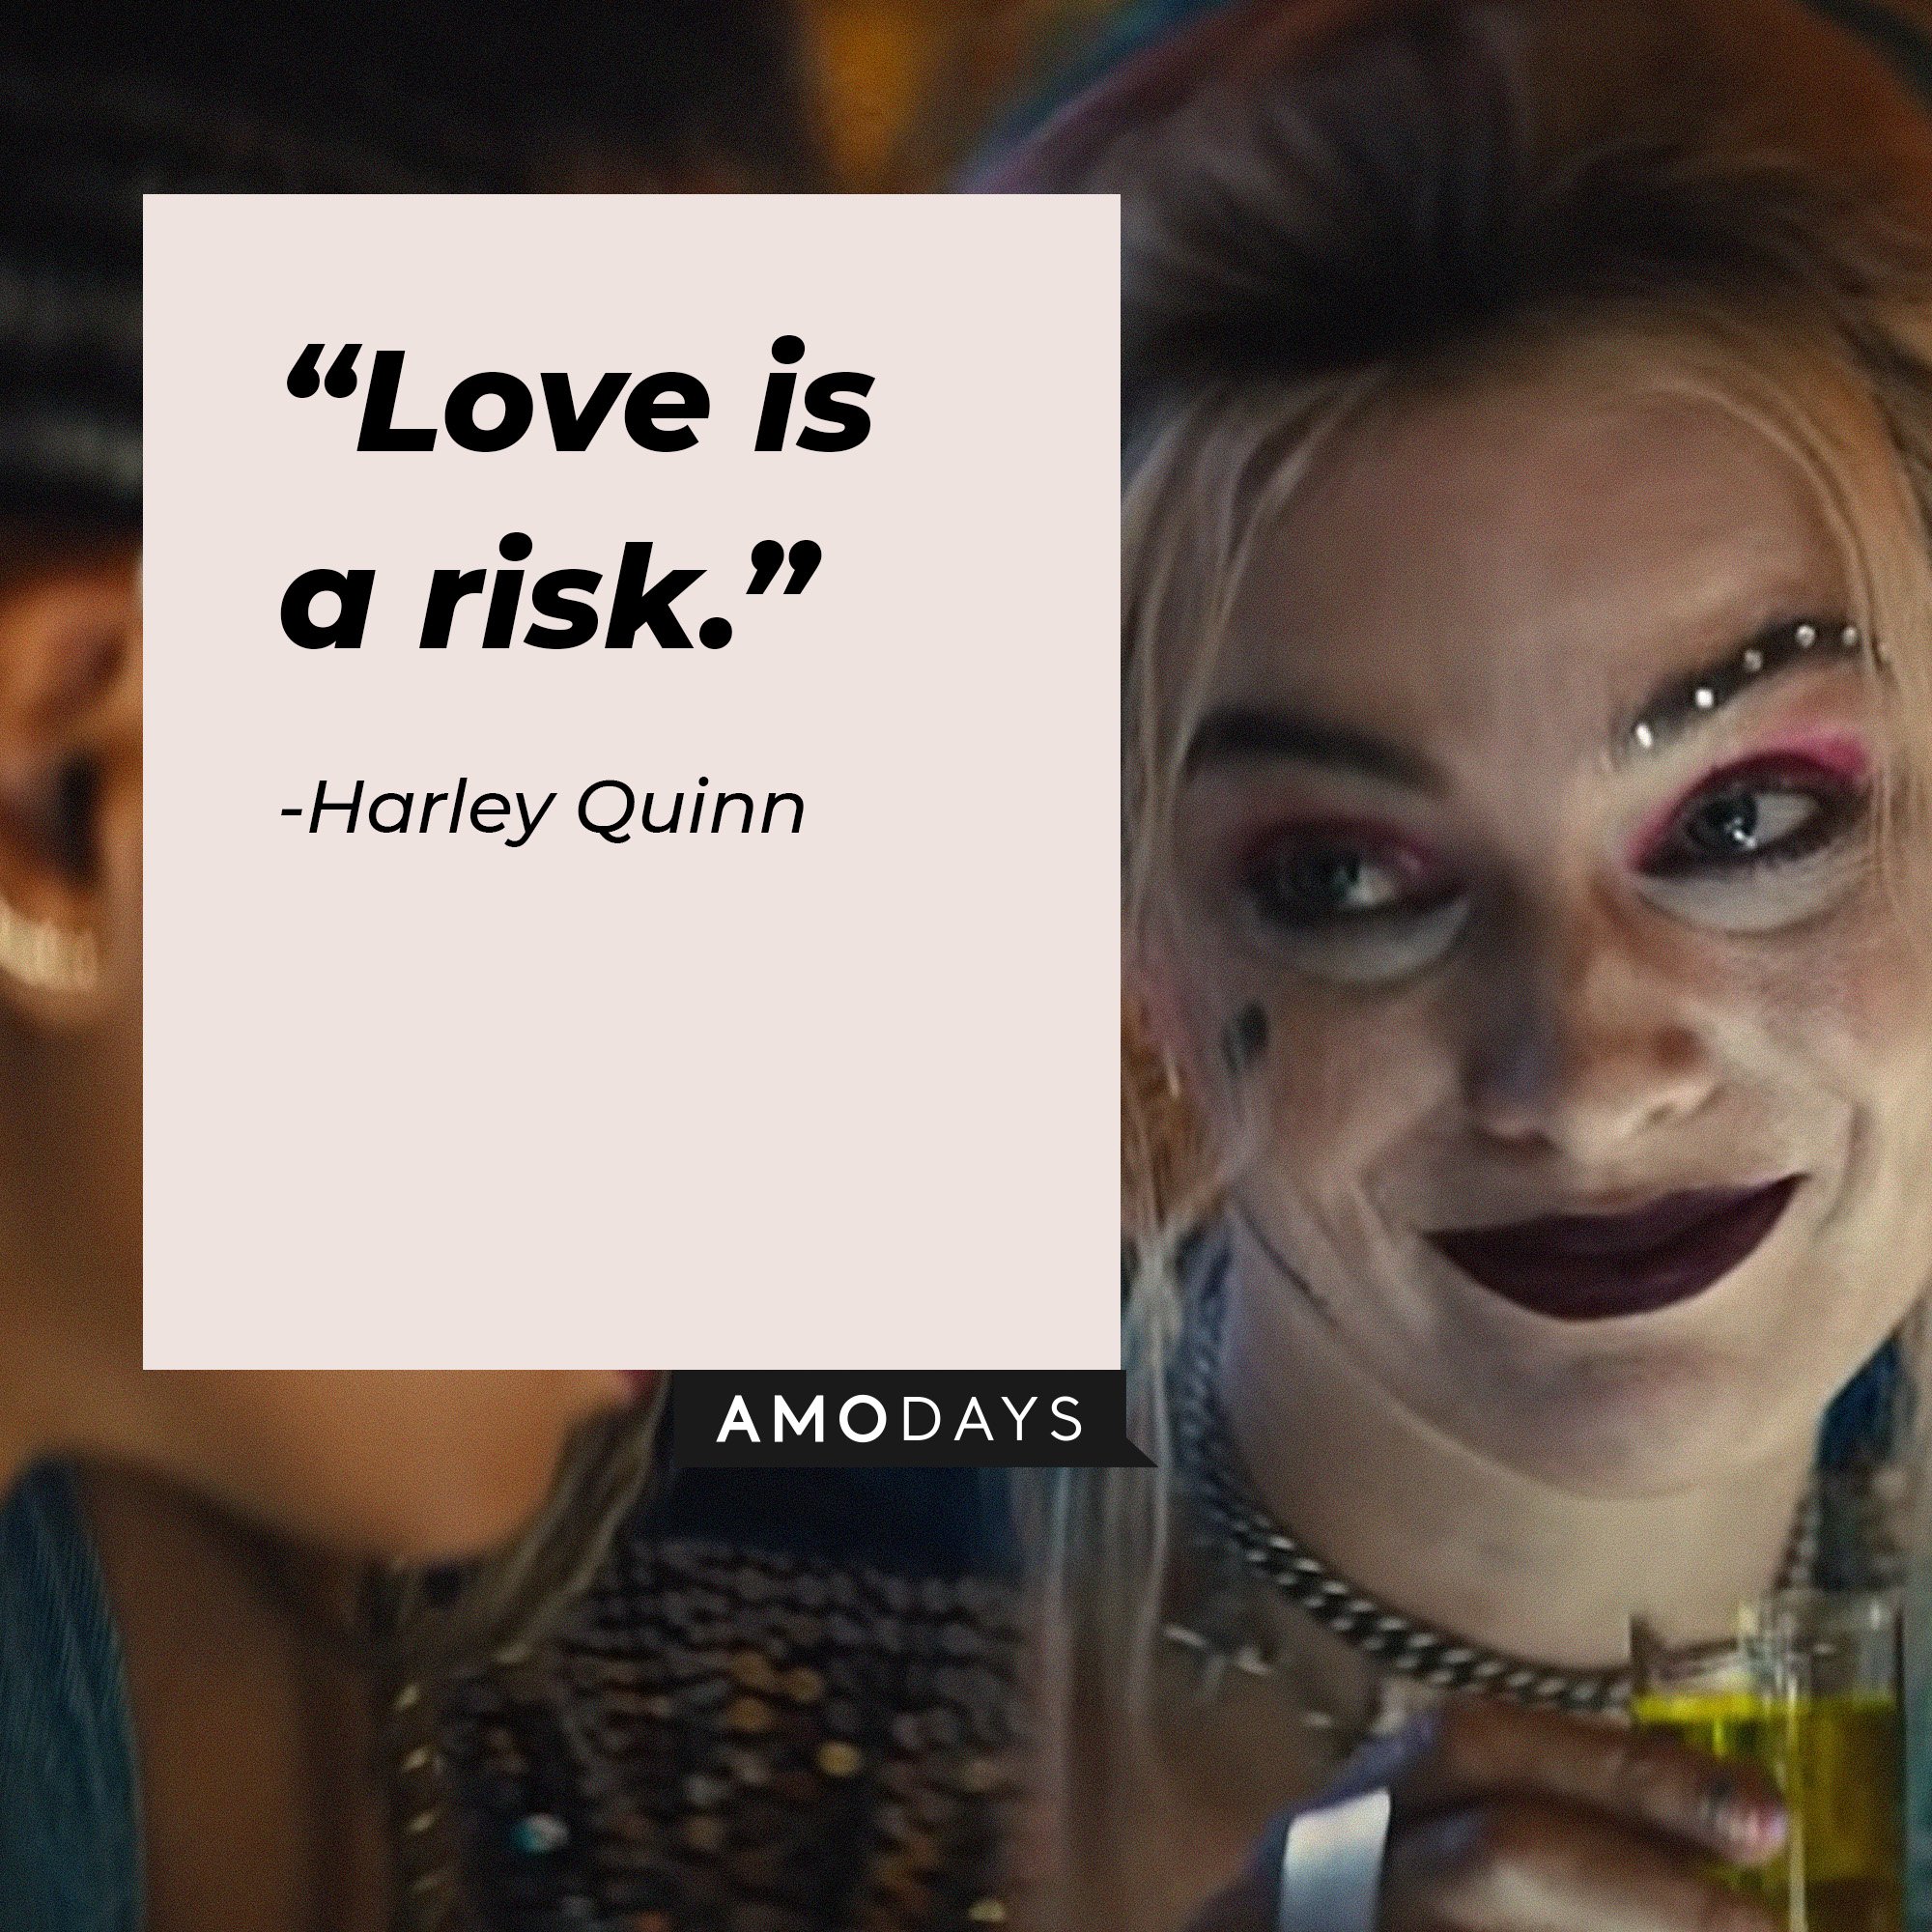 Harley Quinn’s quote: “Love is a risk.” | Source: Image: AmoDays